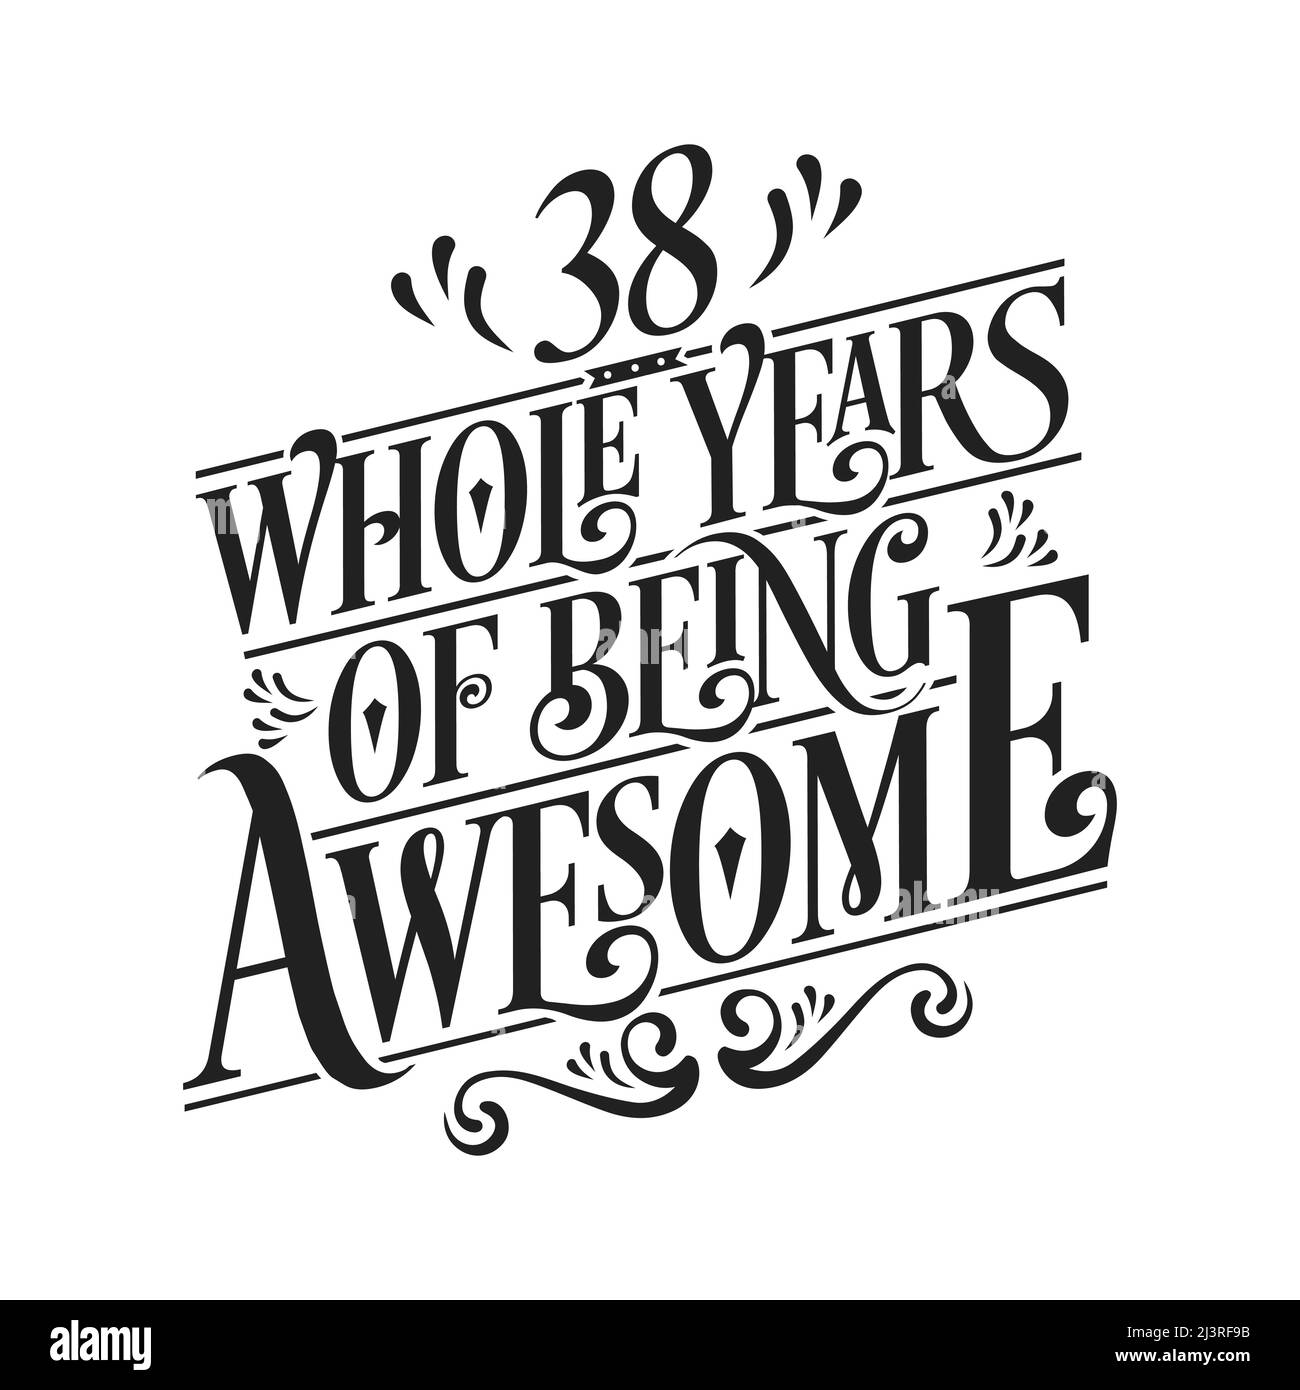 38 whole years of being awesome. 38th birthday celebration lettering Stock Vector